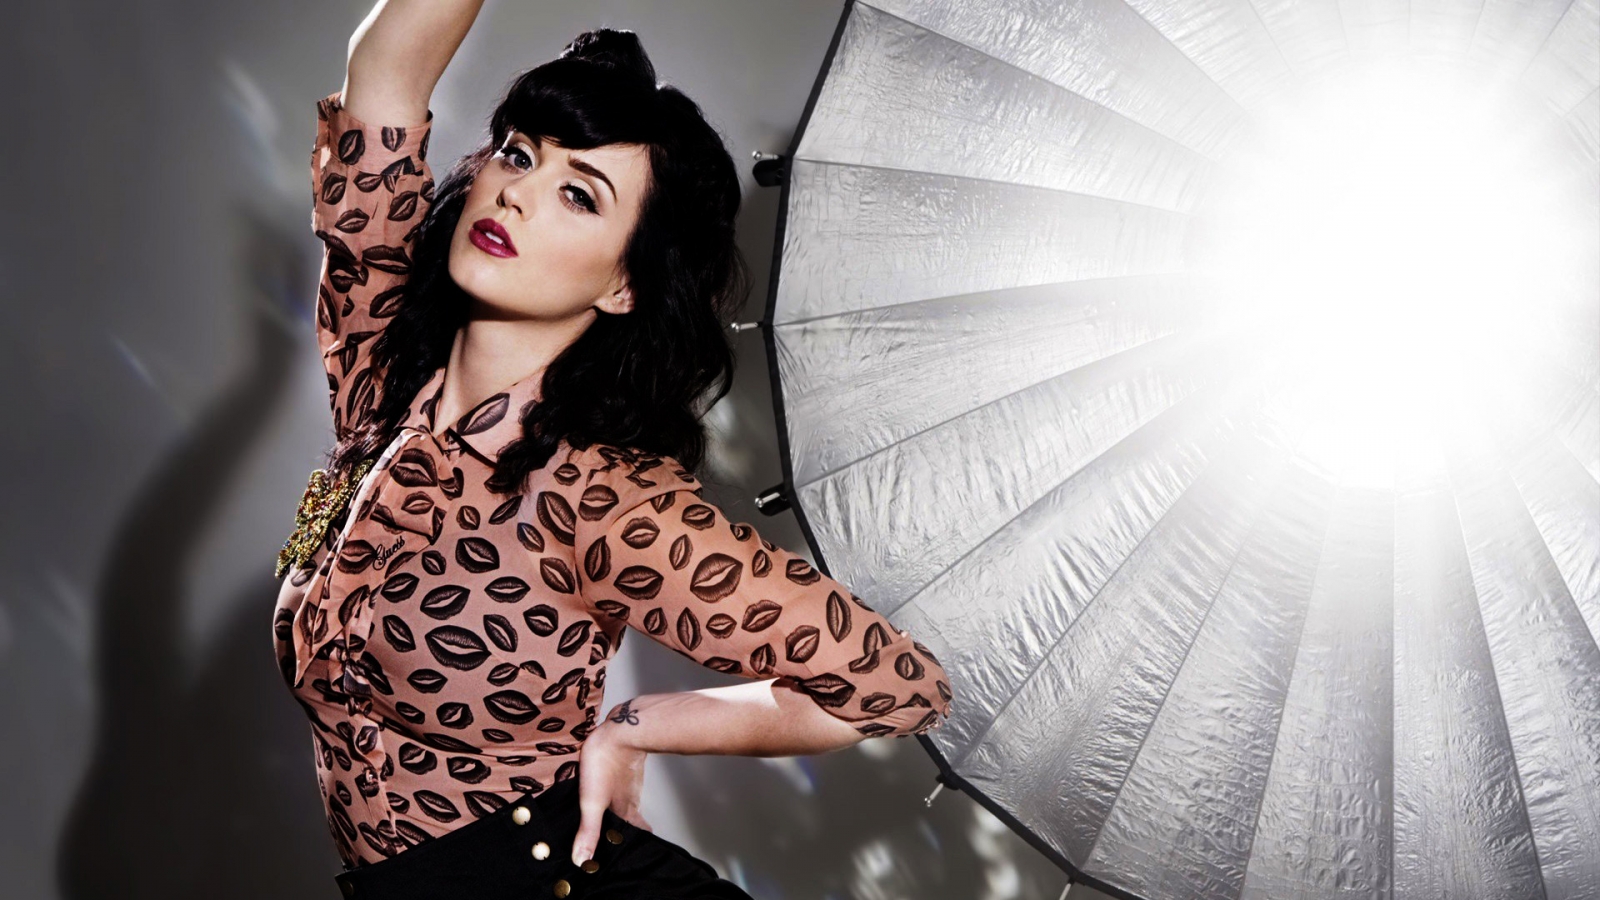 Katy Perry Photo Session for 1600 x 900 HDTV resolution